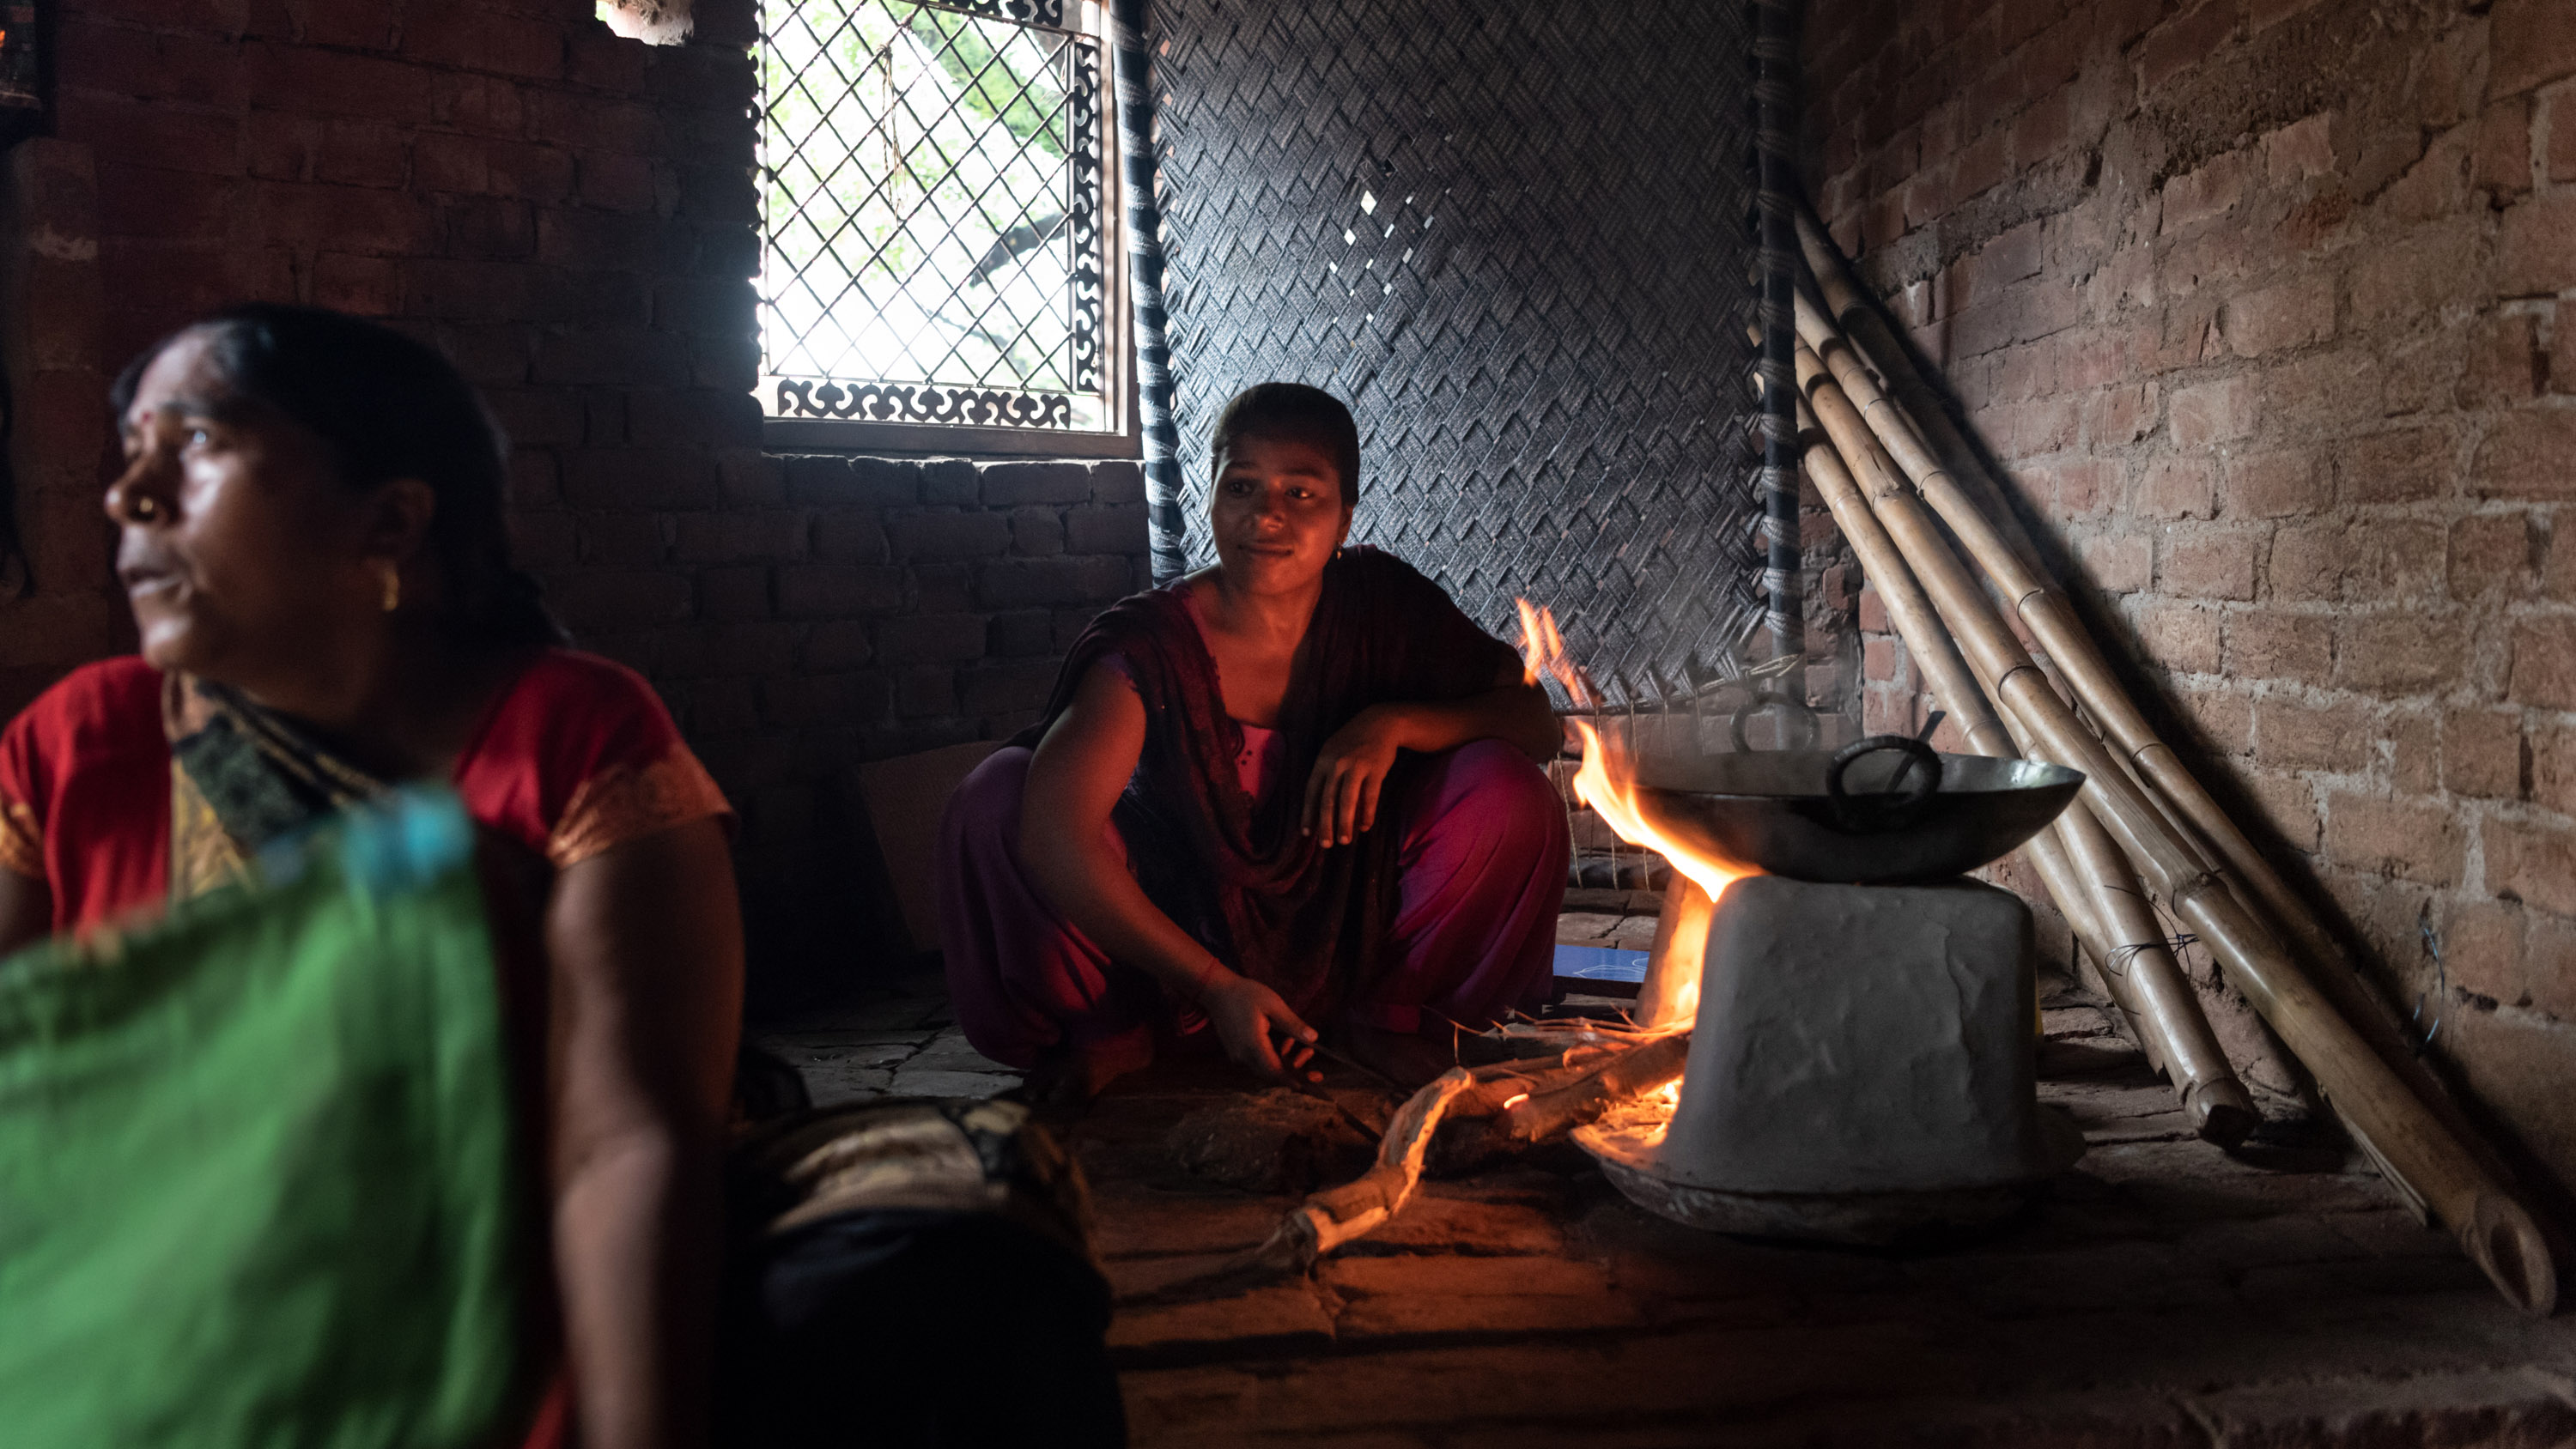 Divya, 20, prepares a meal at her home in the sweltering heat